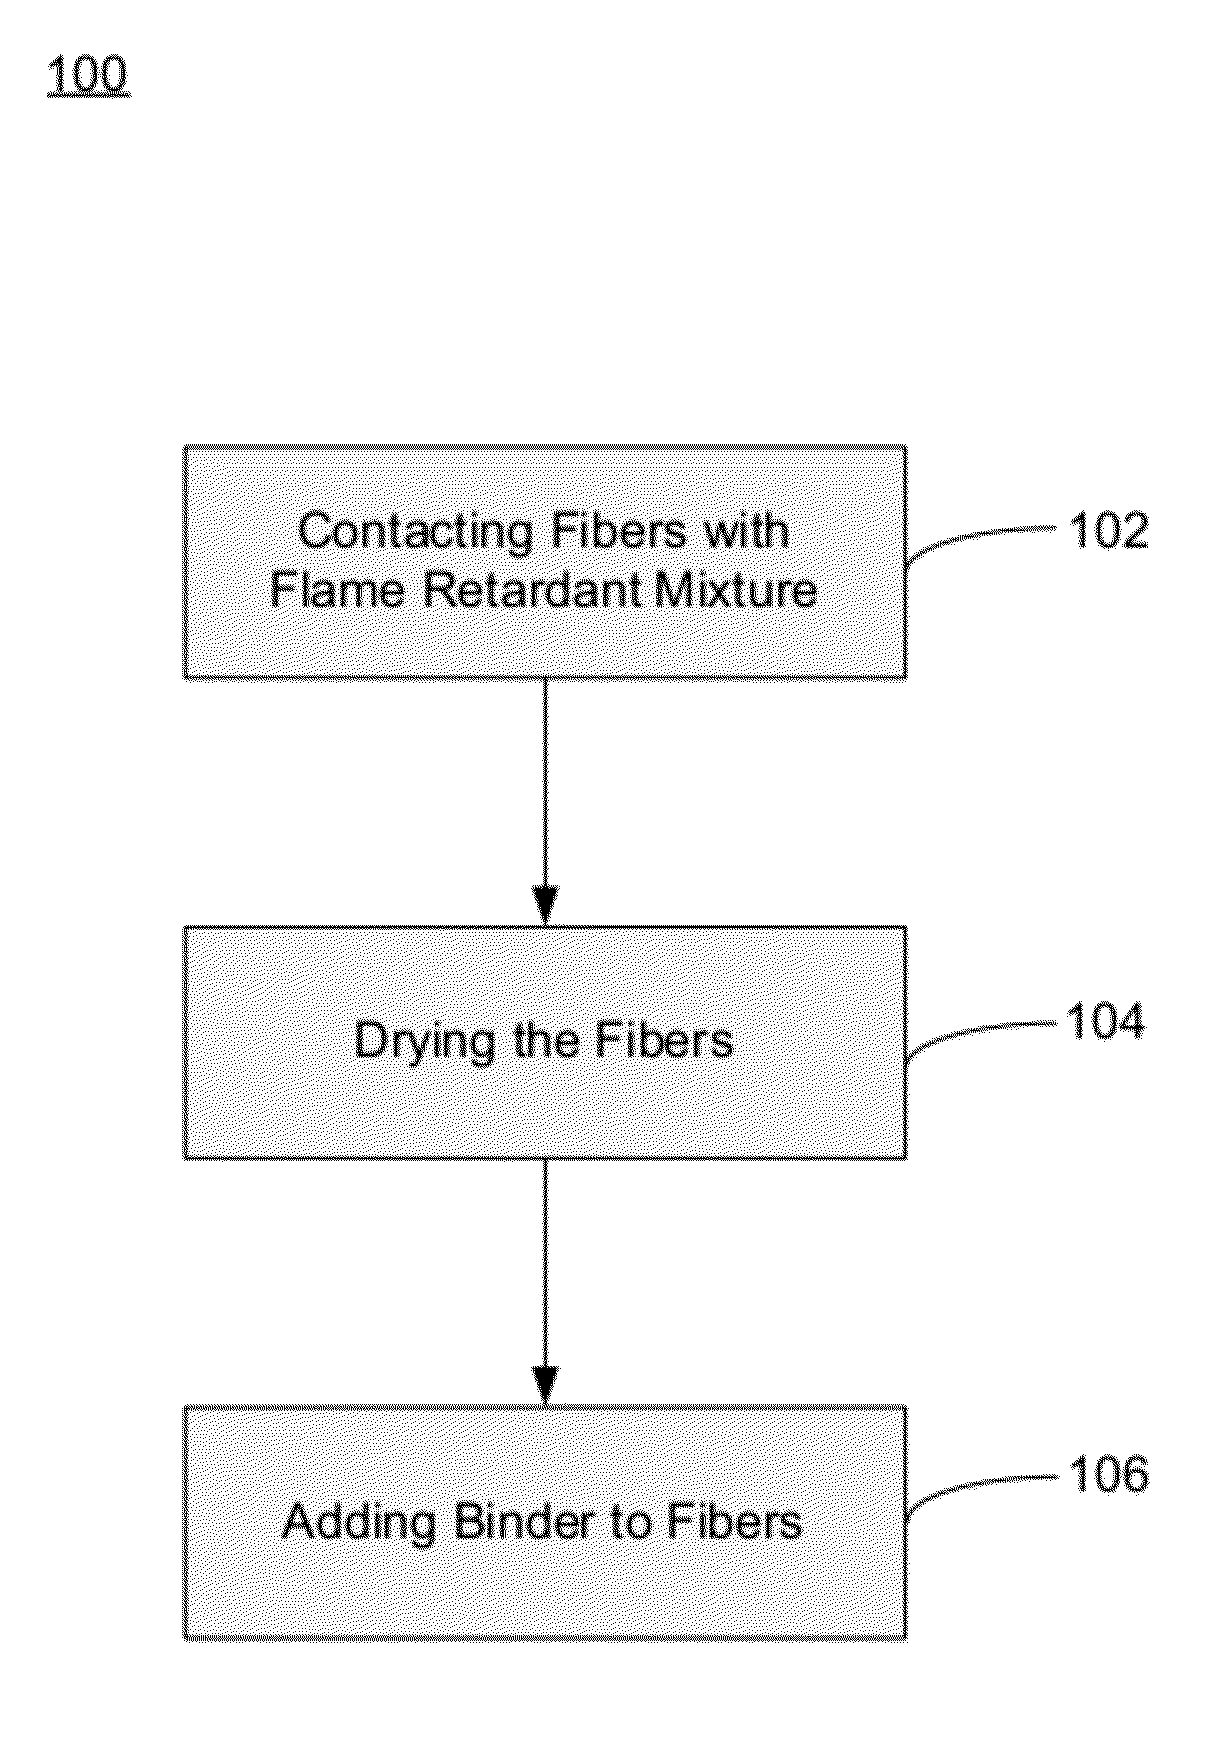 Fiberglass composites with improved flame resistance from phosphorous-containing materials and methods of making the same